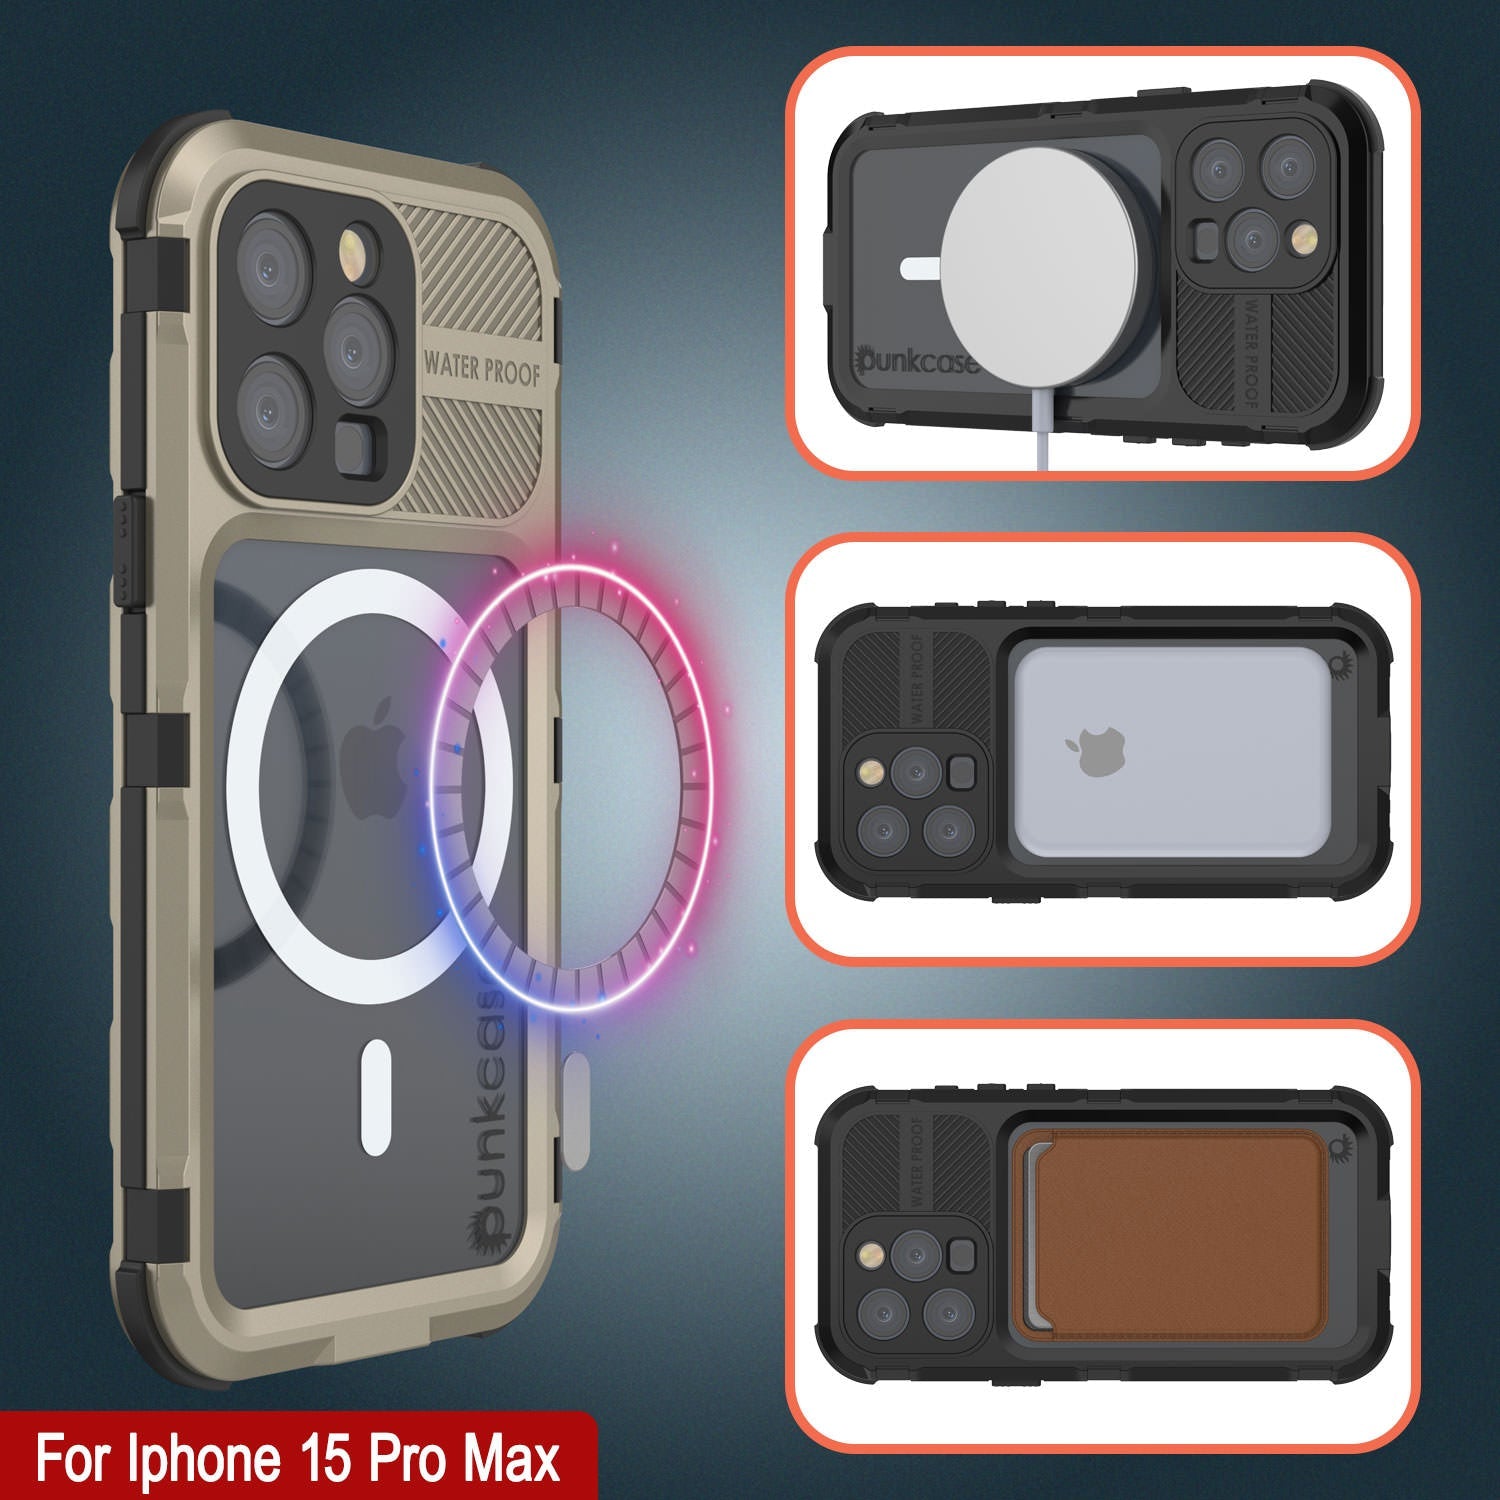 iPhone 15 Pro Max Metal Extreme 2.0 Series Aluminum Waterproof Case IP68 W/Buillt in Screen Protector [Gold]